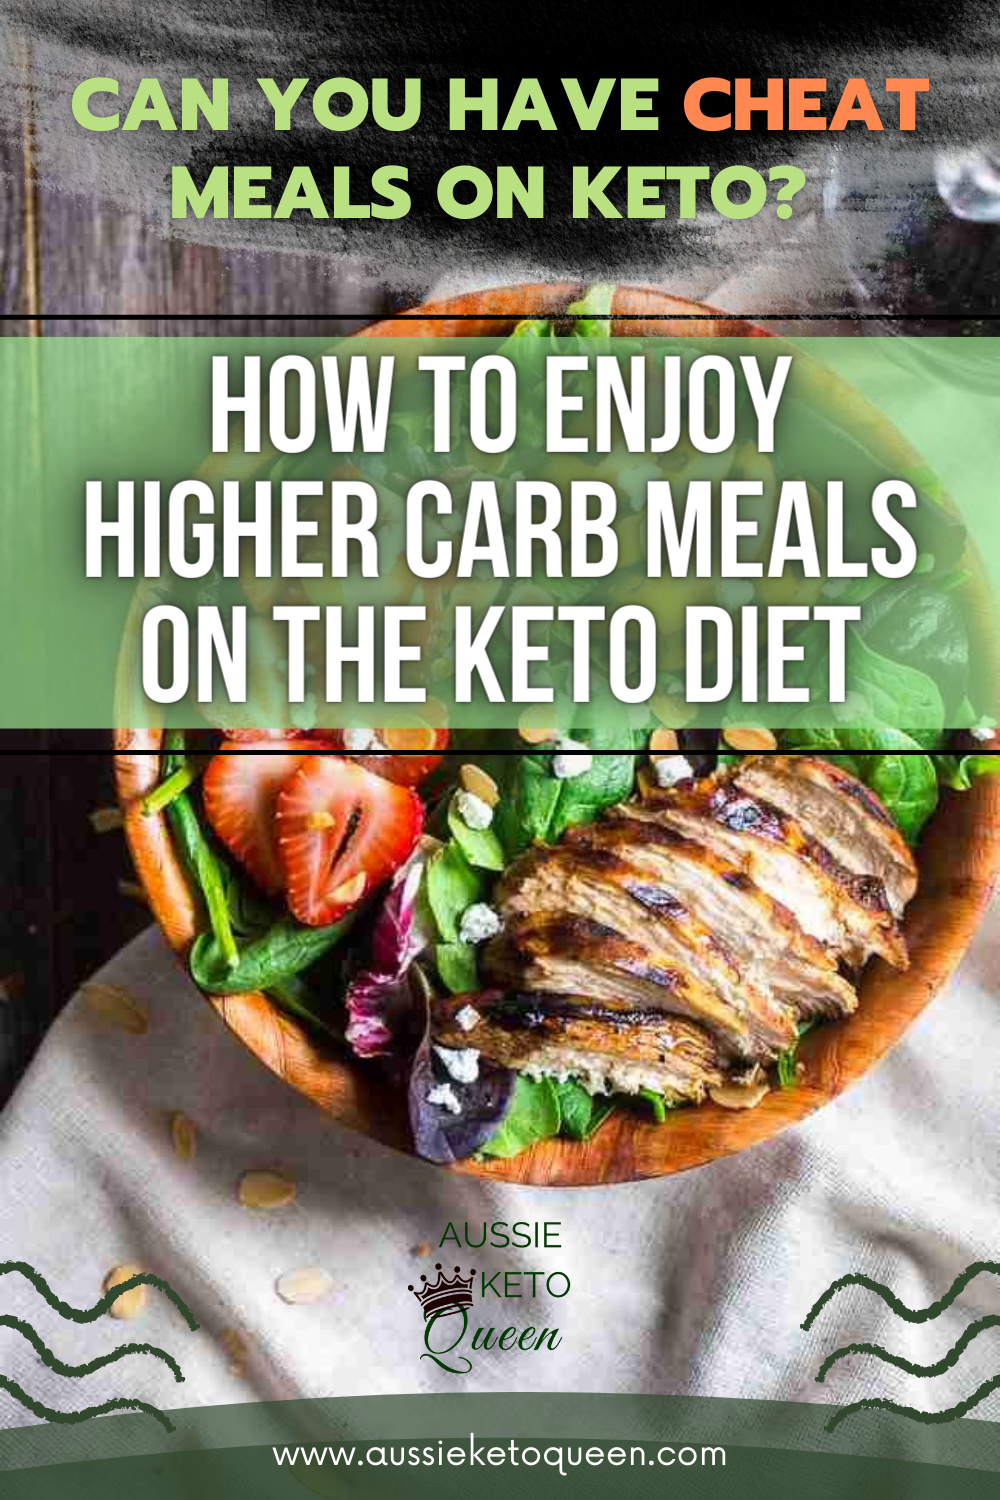 Can You Have Cheat Meals on Keto How to Enjoy Higher Carb Meals on the Keto Diet.